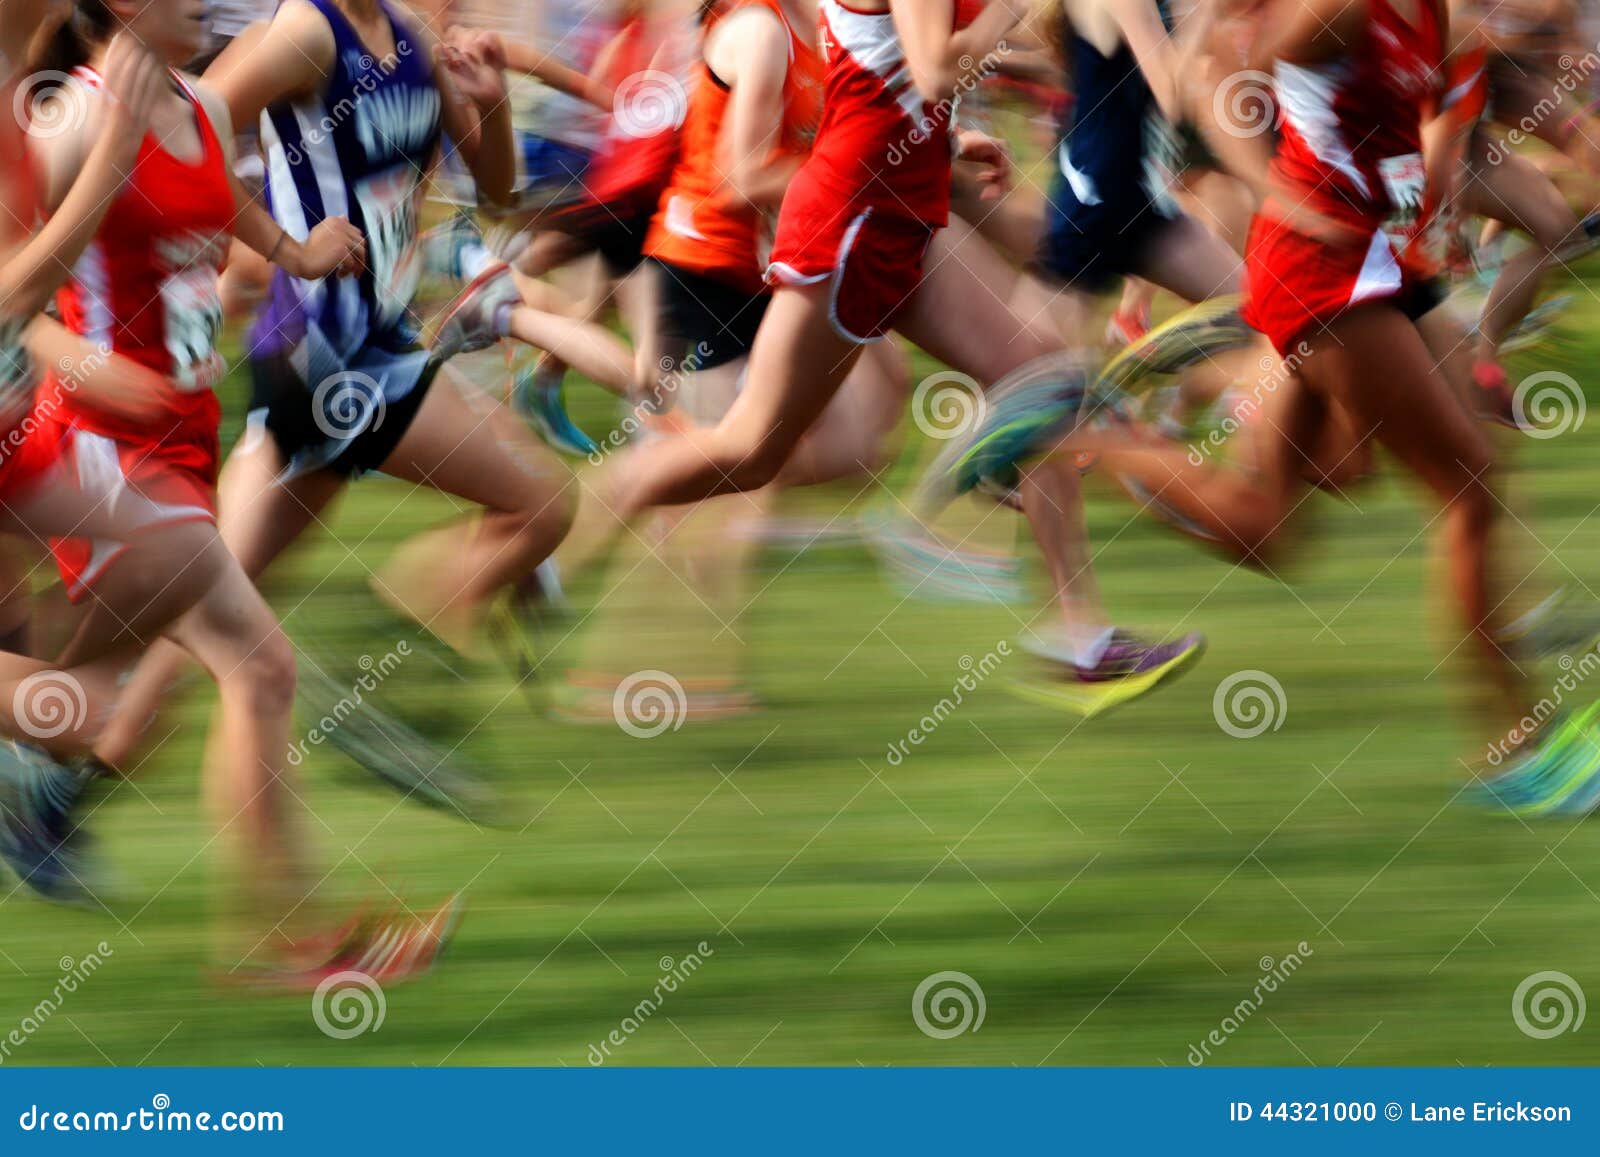 running a race in motion